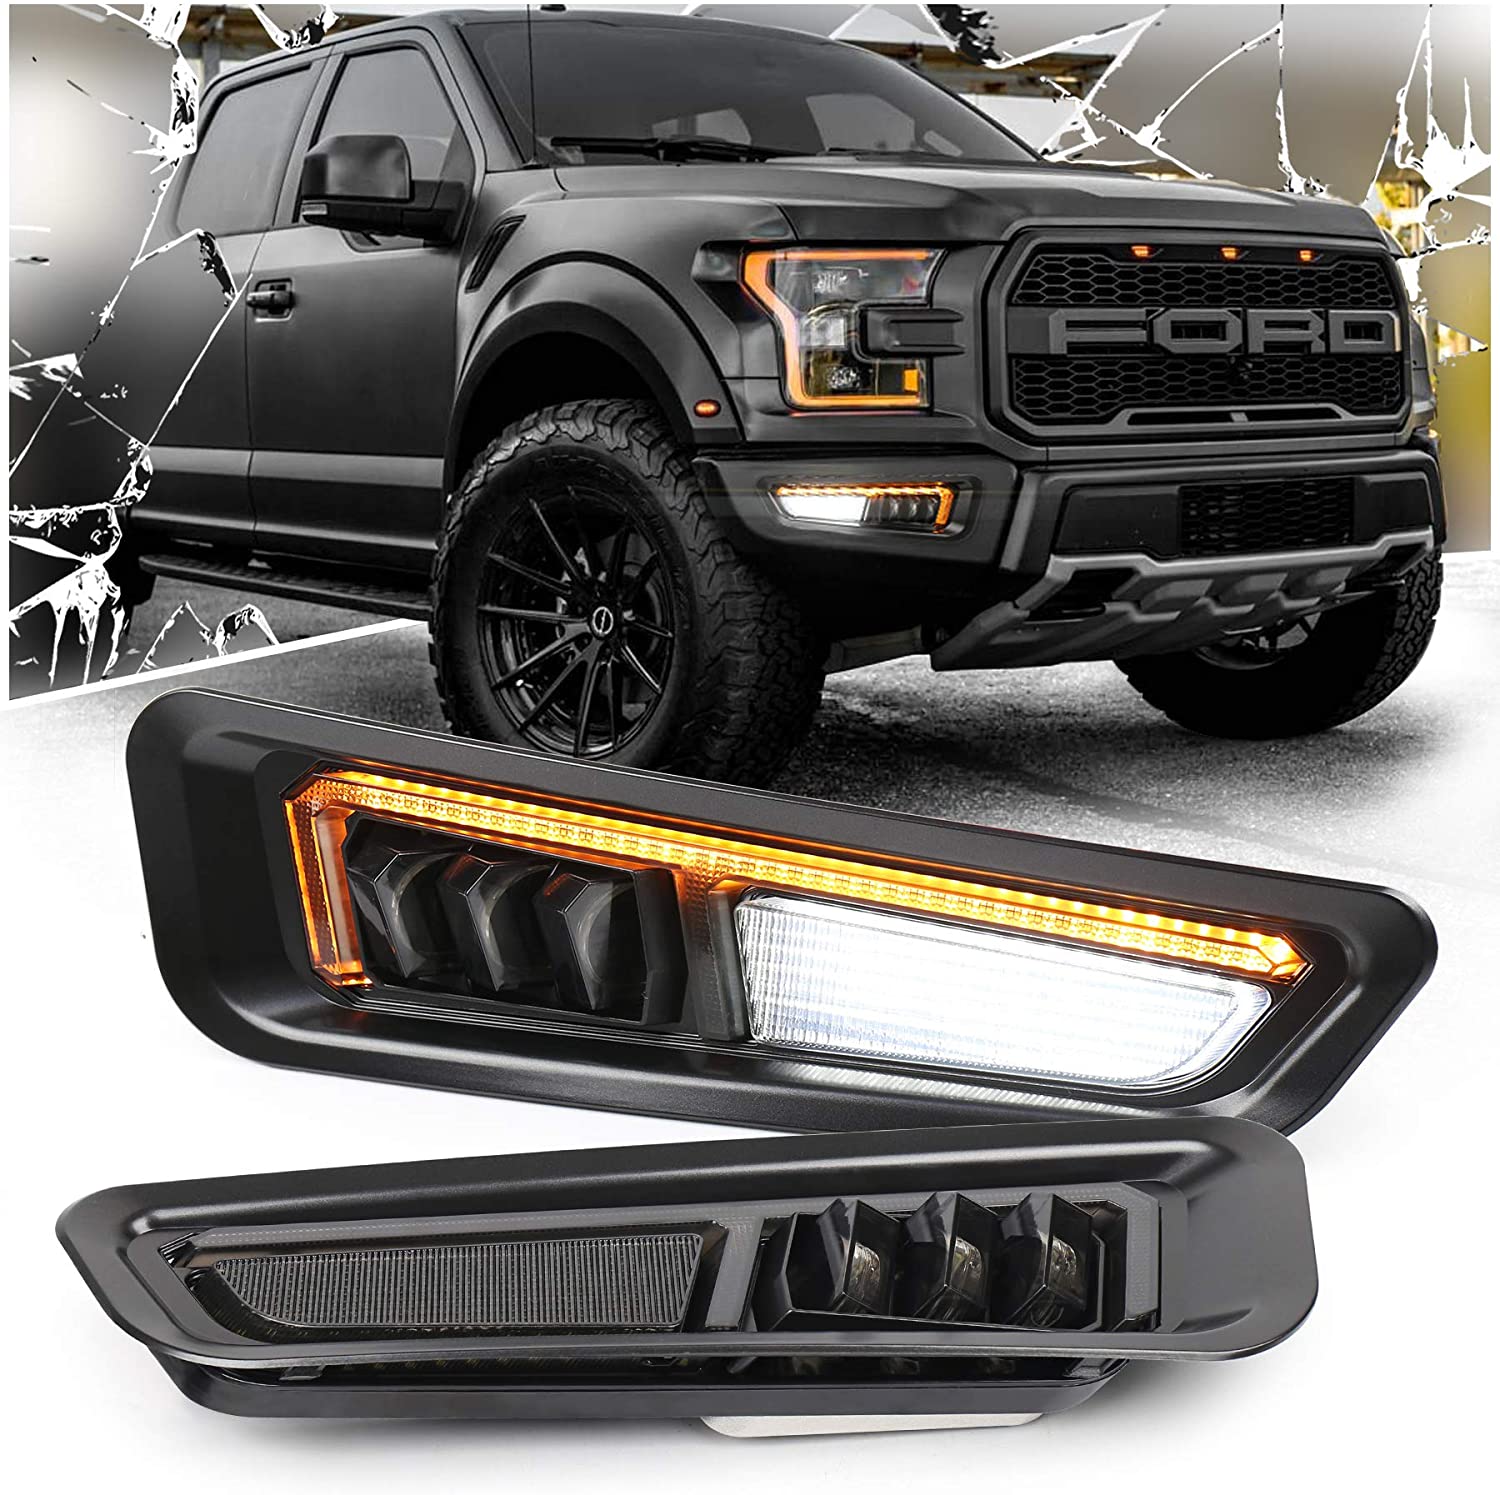 MOVOTOR Raptor Fog Lights with Sequential Amber Turn Signal DRL Bumper Fog Driving Lights Compatible with Ford F150 Raptor 2017 2018 2019 2020 